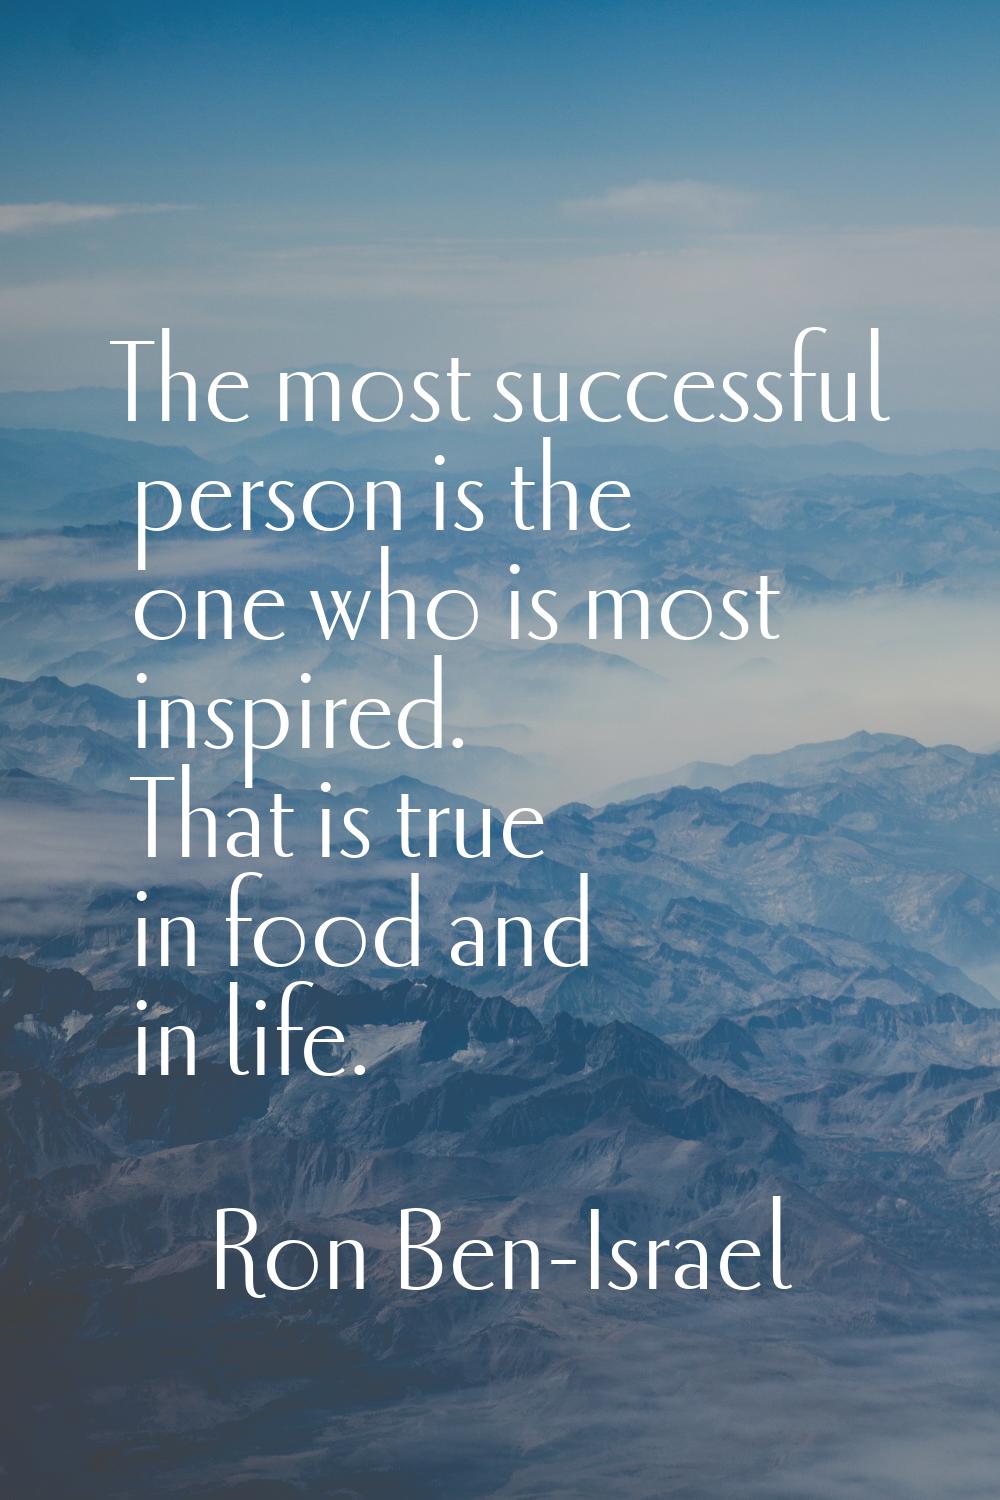 The most successful person is the one who is most inspired. That is true in food and in life.